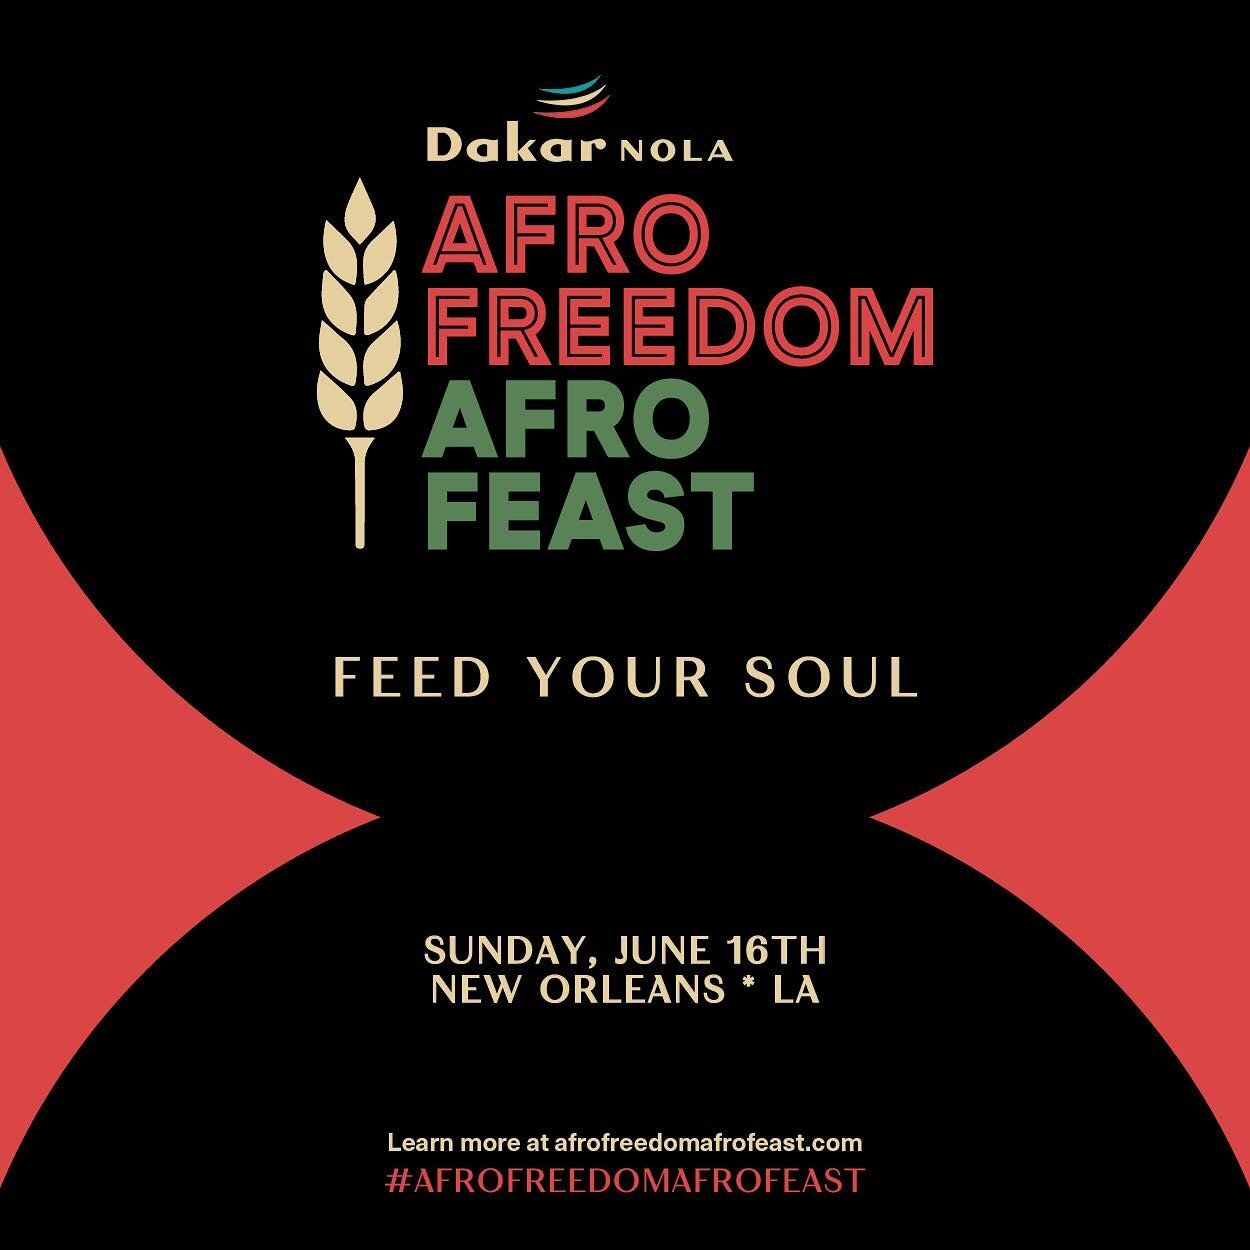 Excited for this one baby!!! 🌾🌿🍴
First time producing the 3rd Annual Afro Freedom Afro Feast event - a culinary celebration that gathers award winning Chefs from New Orleans cooking over open flame to pay homage to our ancestors.  Led by Chef @ser